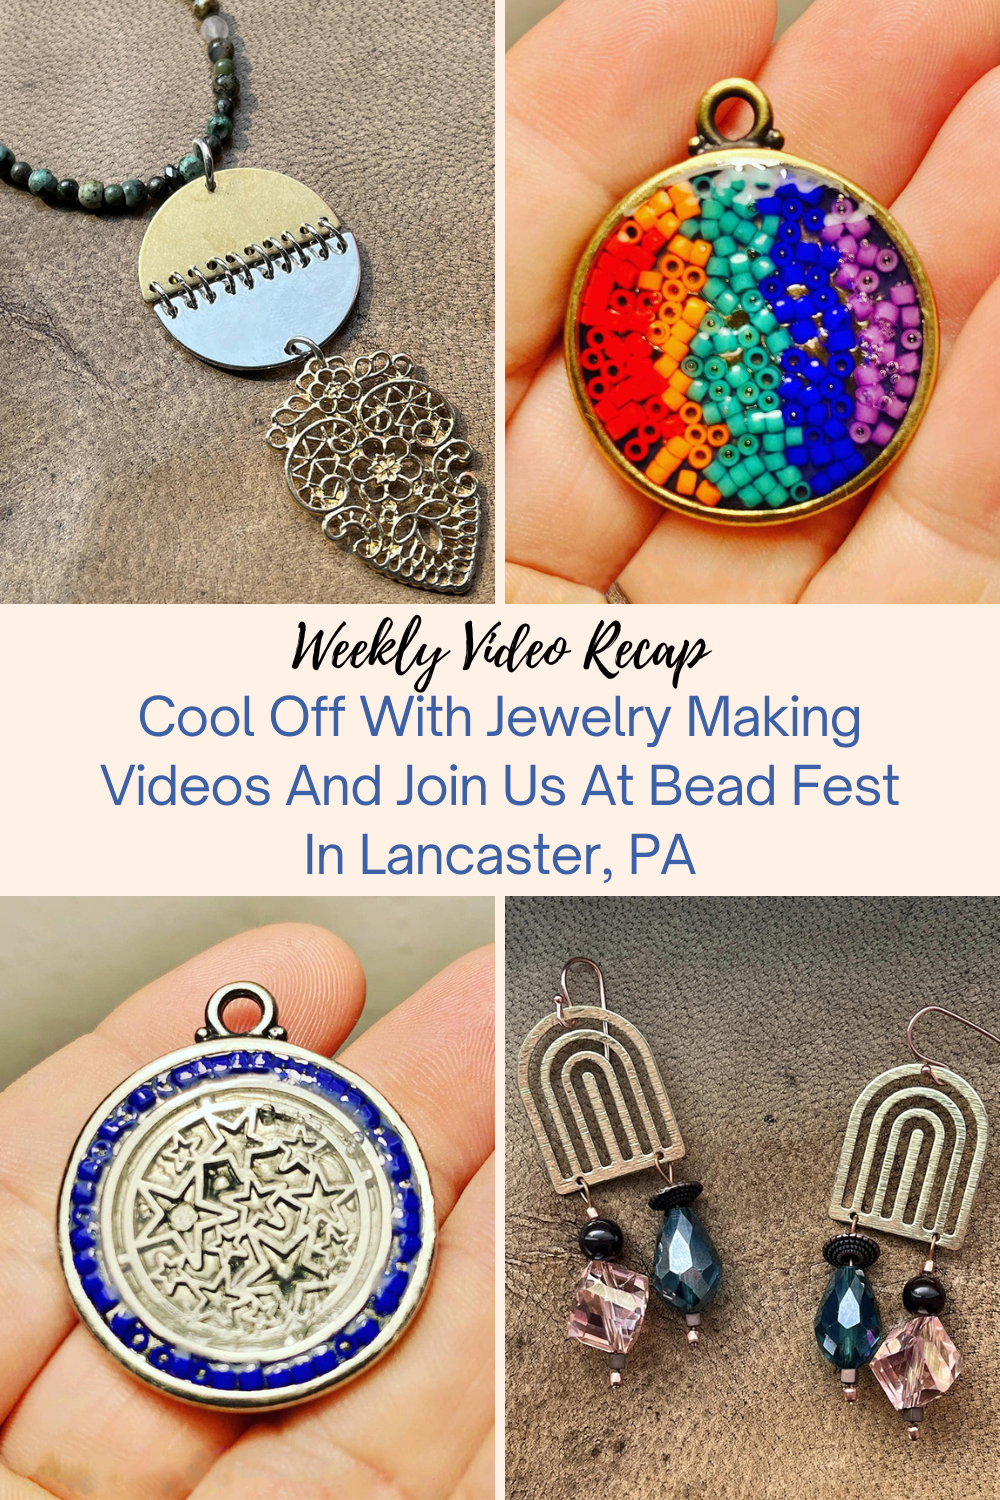 Cool Off With Jewelry Making Videos And Join Us At Bead Fest In Lancaster, PA Collage